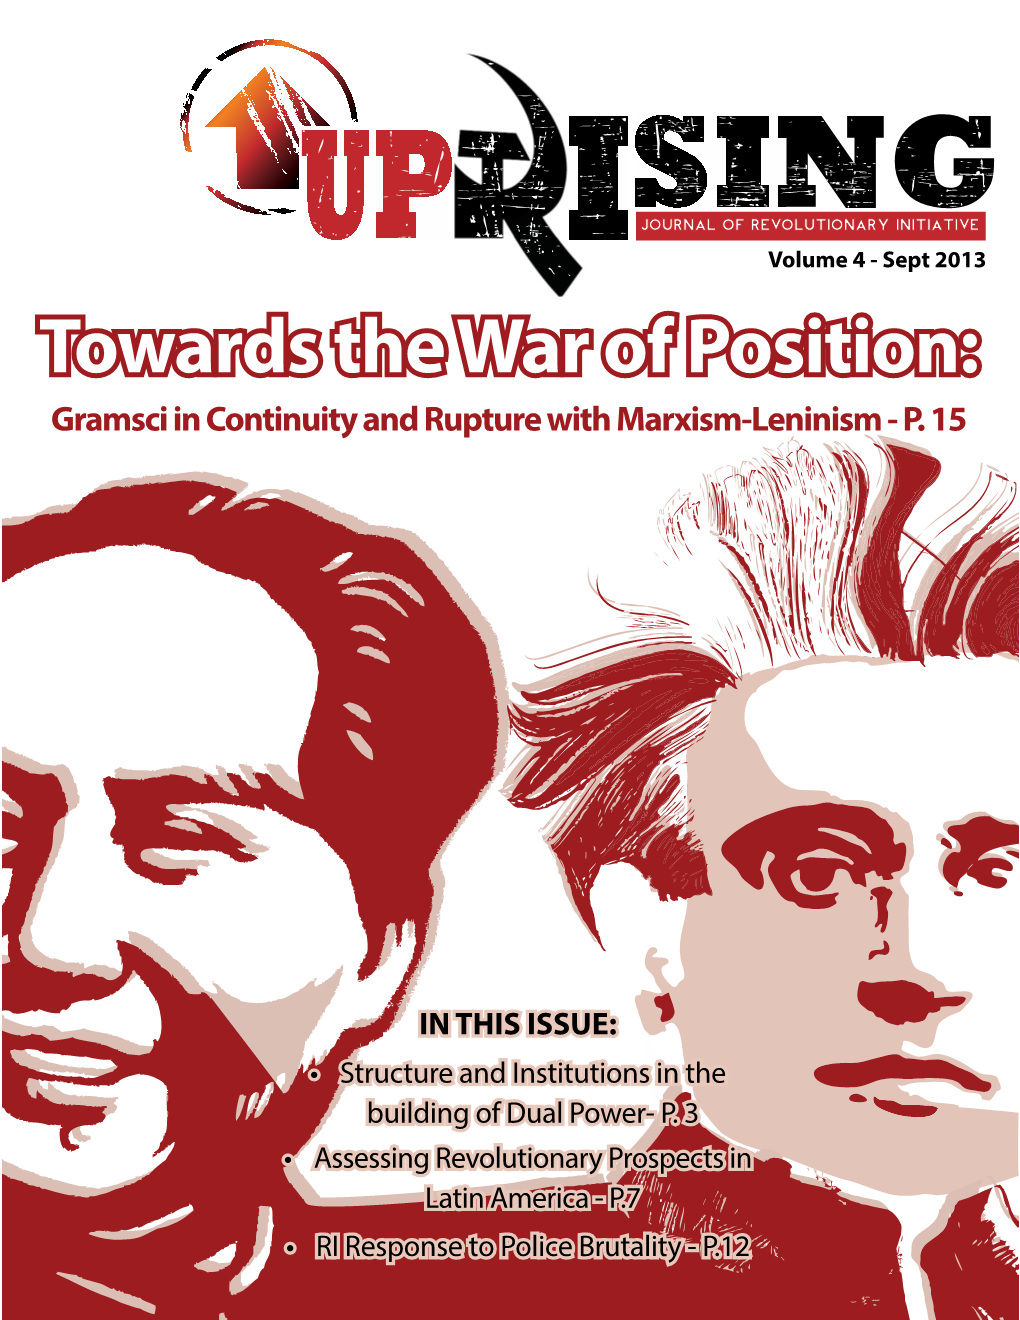 Towards the War of Position: Gramsci in Continuity and Rupture with Marxism-Leninism - P